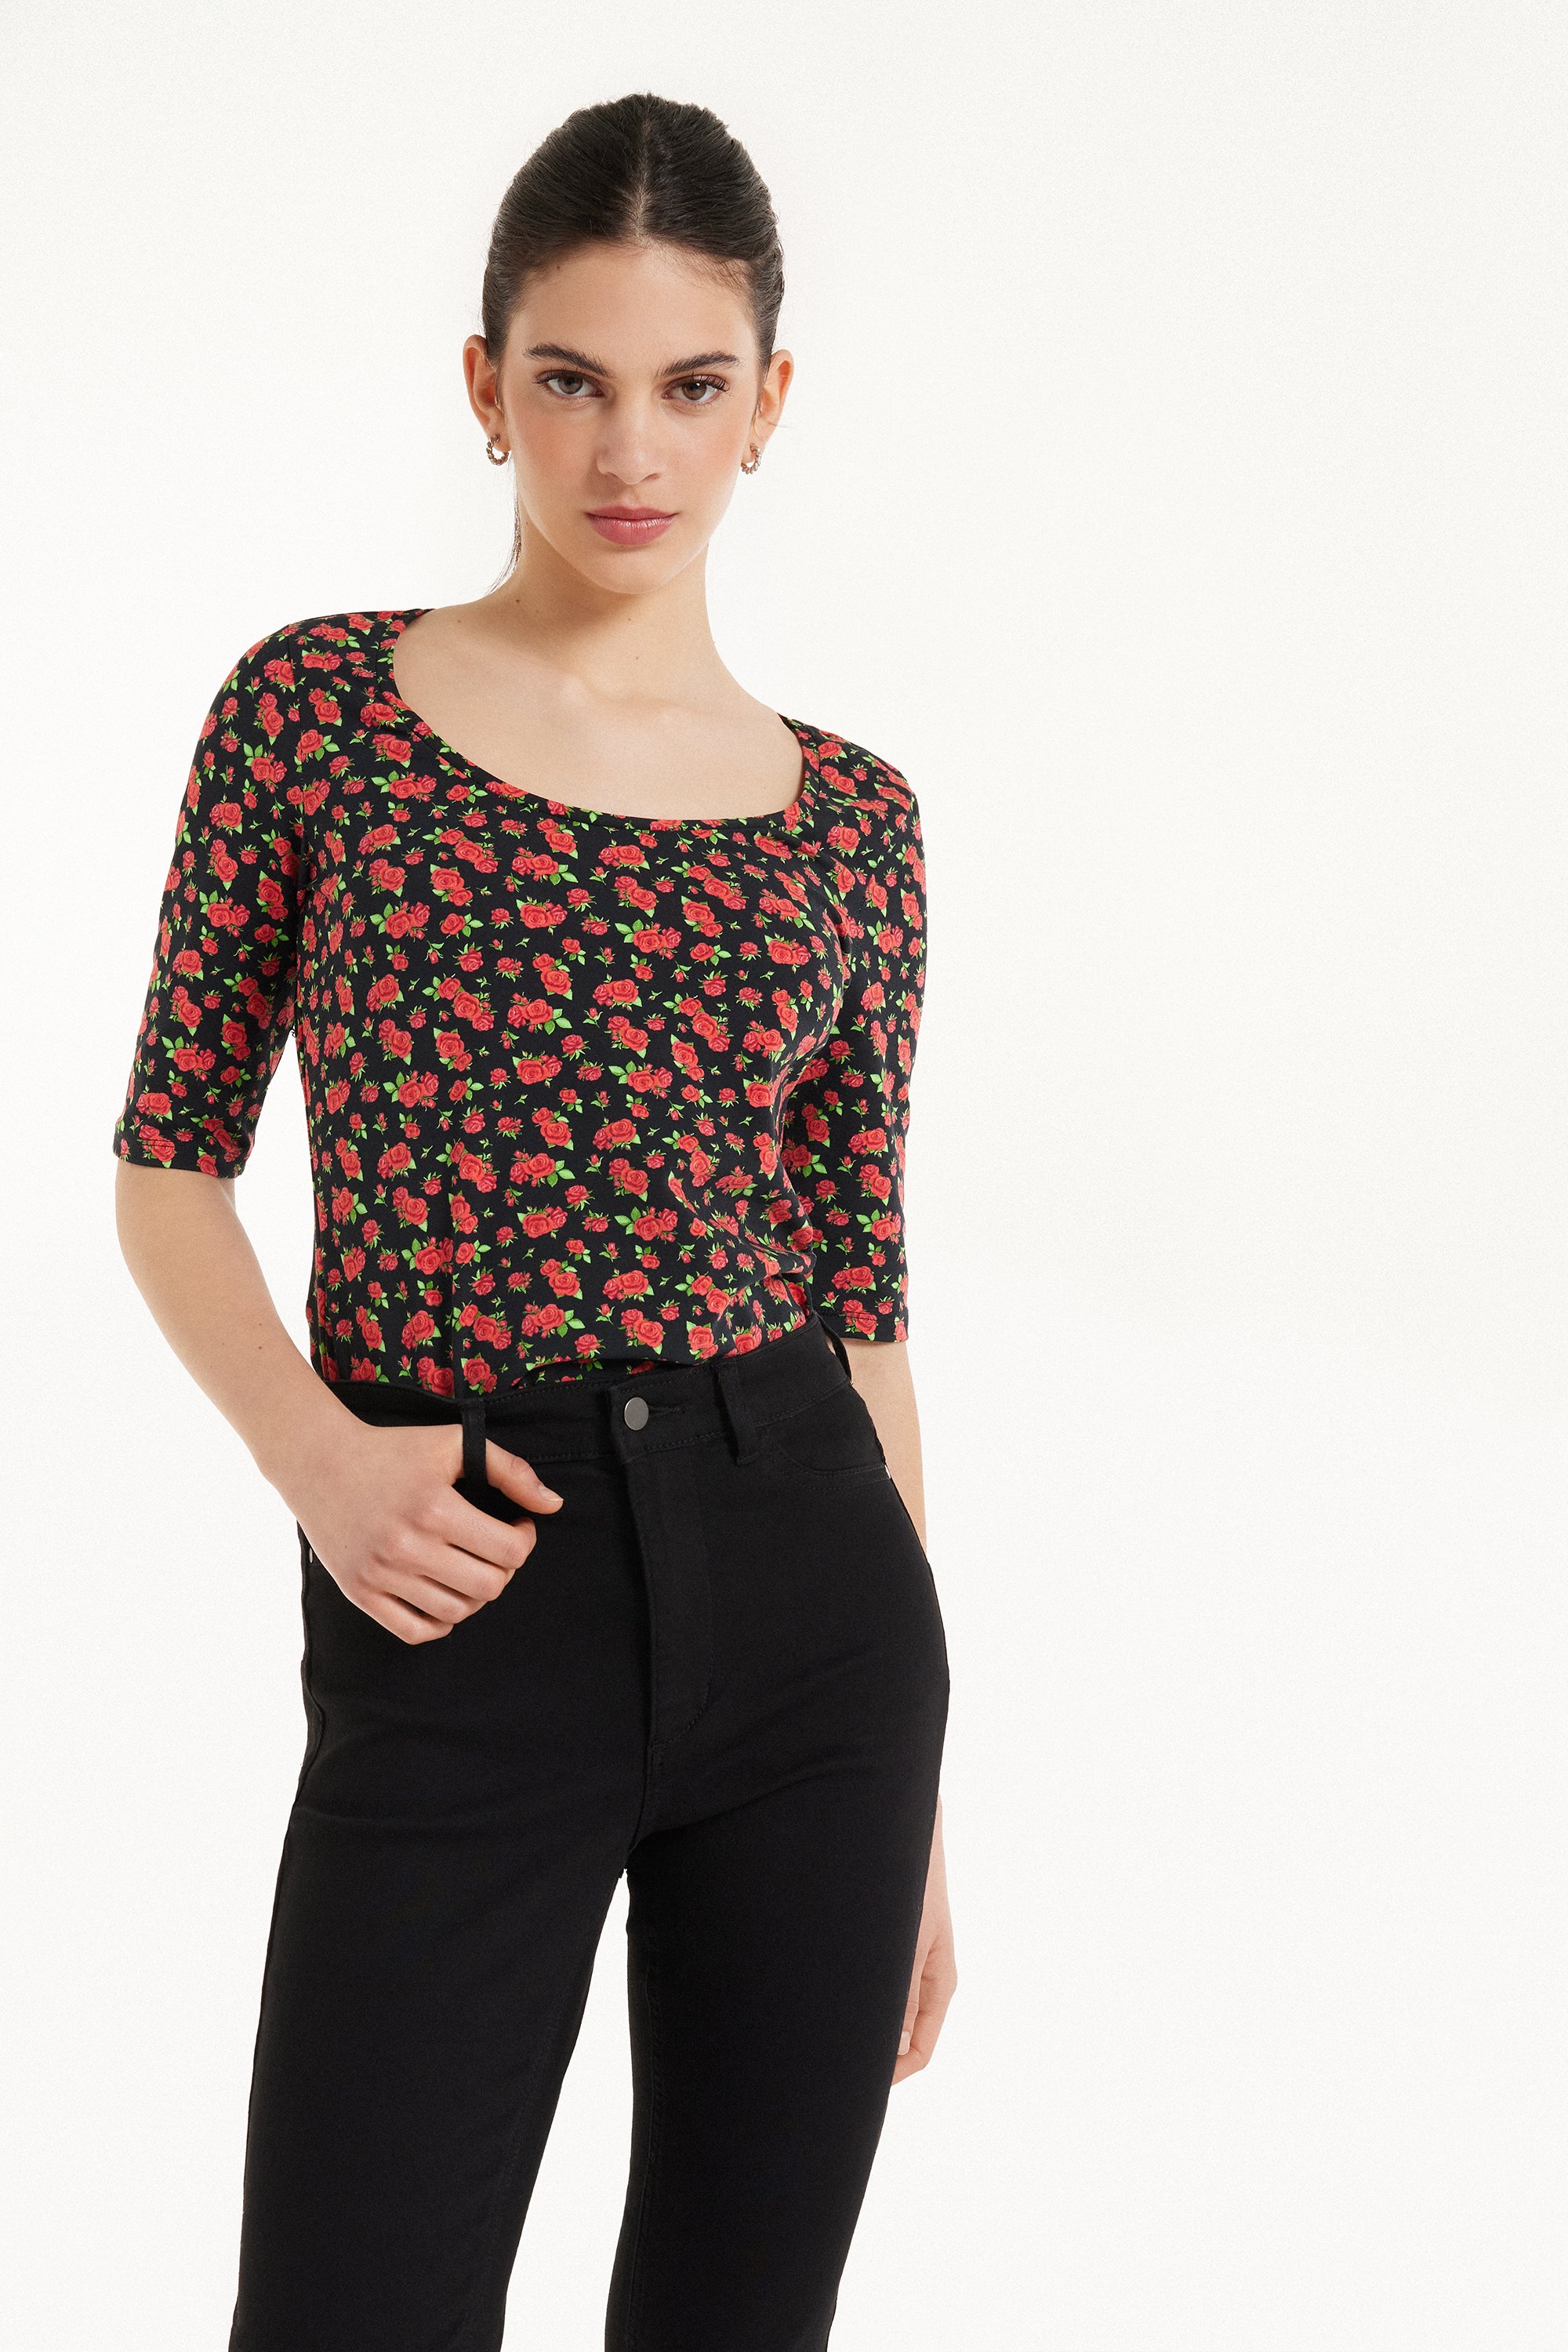 Short Sleeve, Wide-Neck Printed Cotton Top